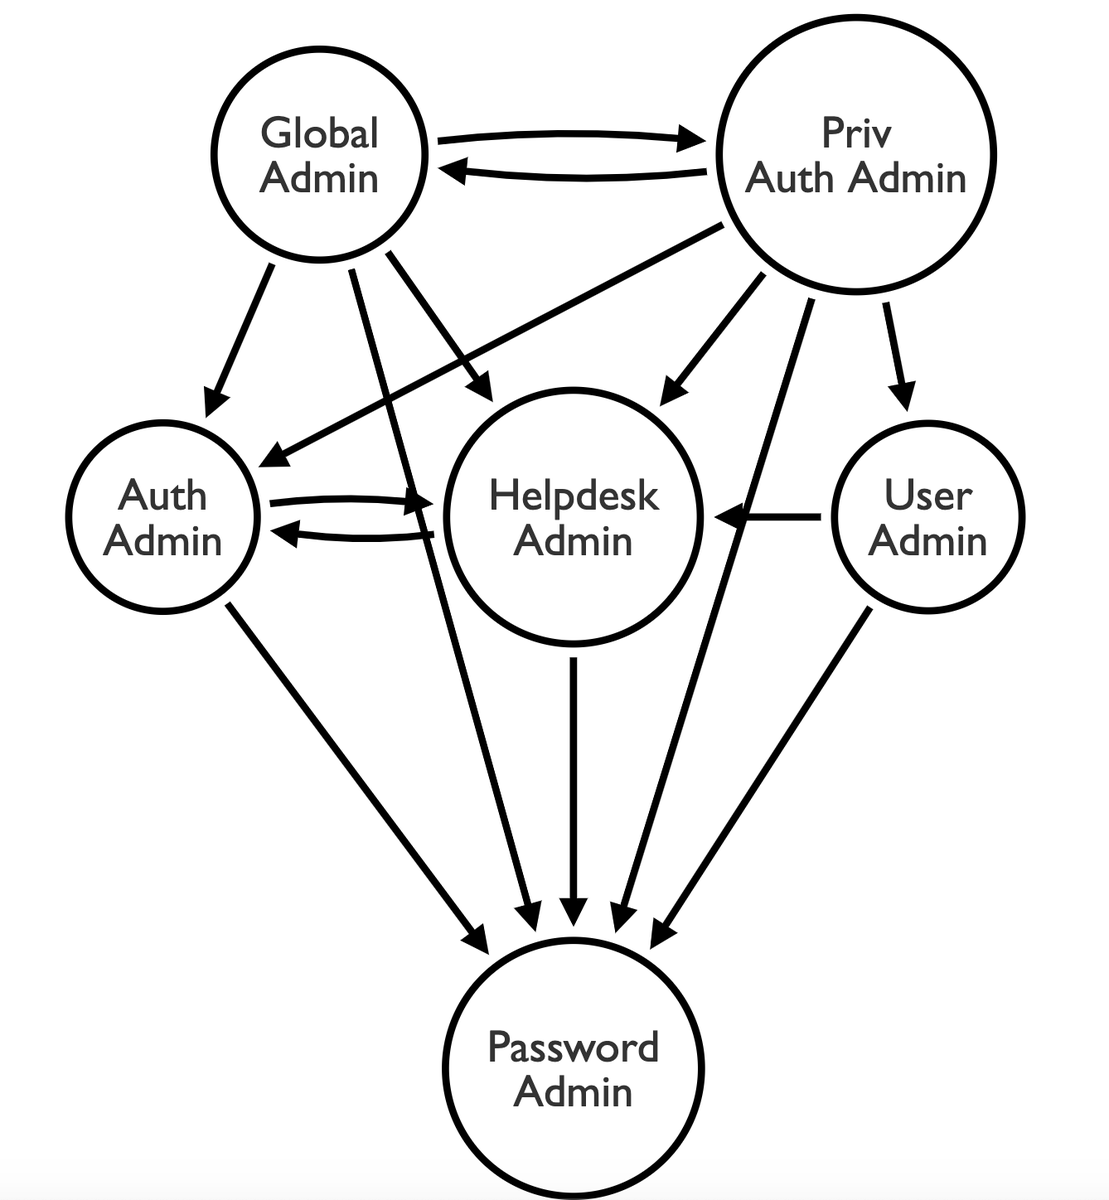 So what happens when we view this as a graph? If we model each node as a node and password reset rights as an edge, then view nodes in descending order of outbound edges (most privileged at top, least privileged at bottom, relative to each other), we learn a few things:  https://twitter.com/_wald0/status/1327339539782897664